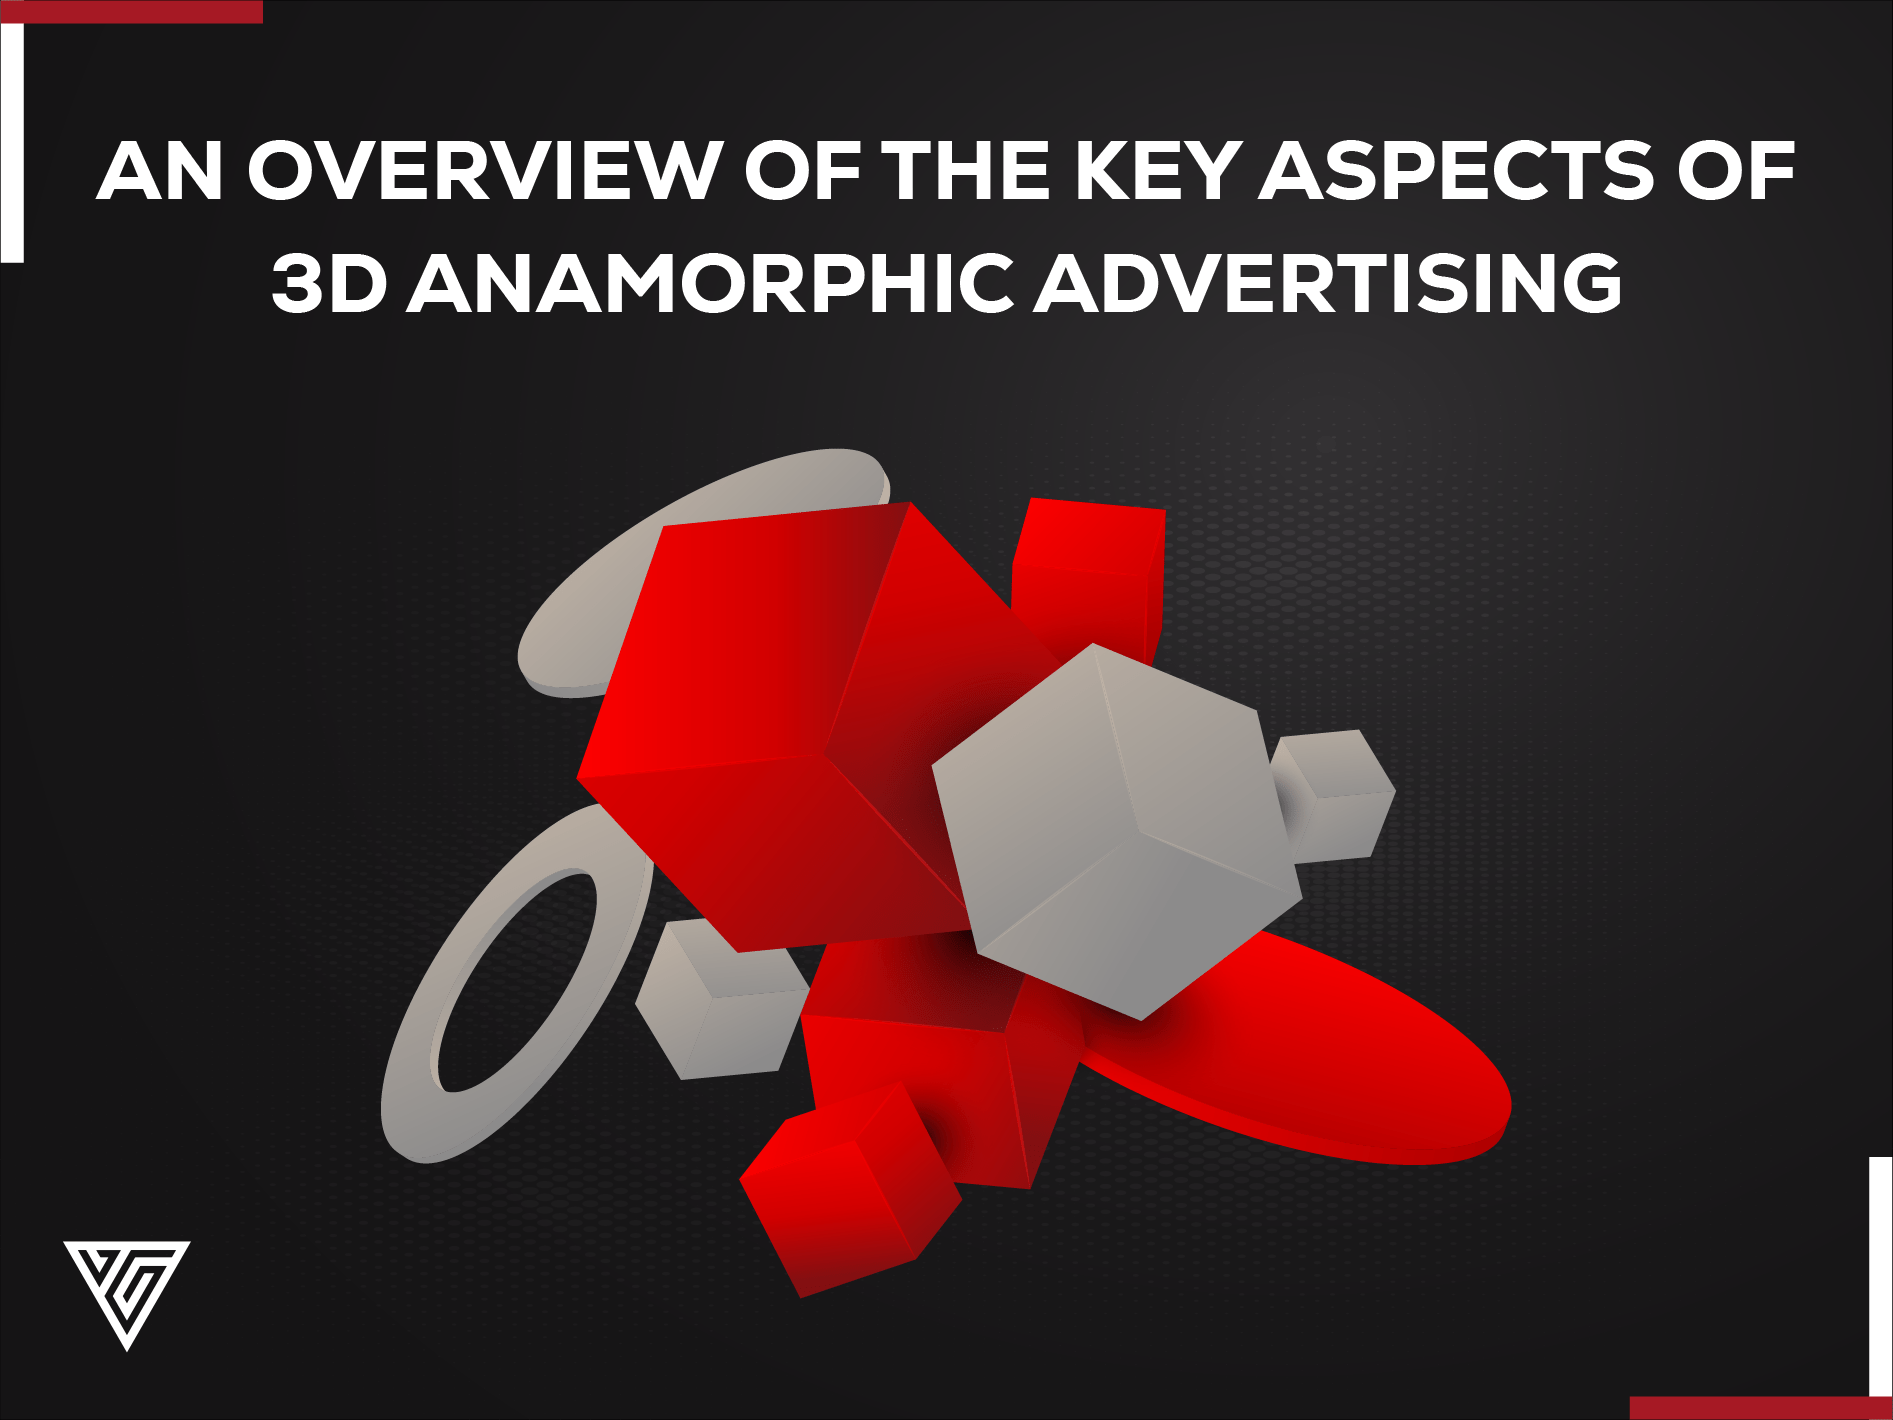 3D Anamorphic Advertising: An Overview of Key Aspects